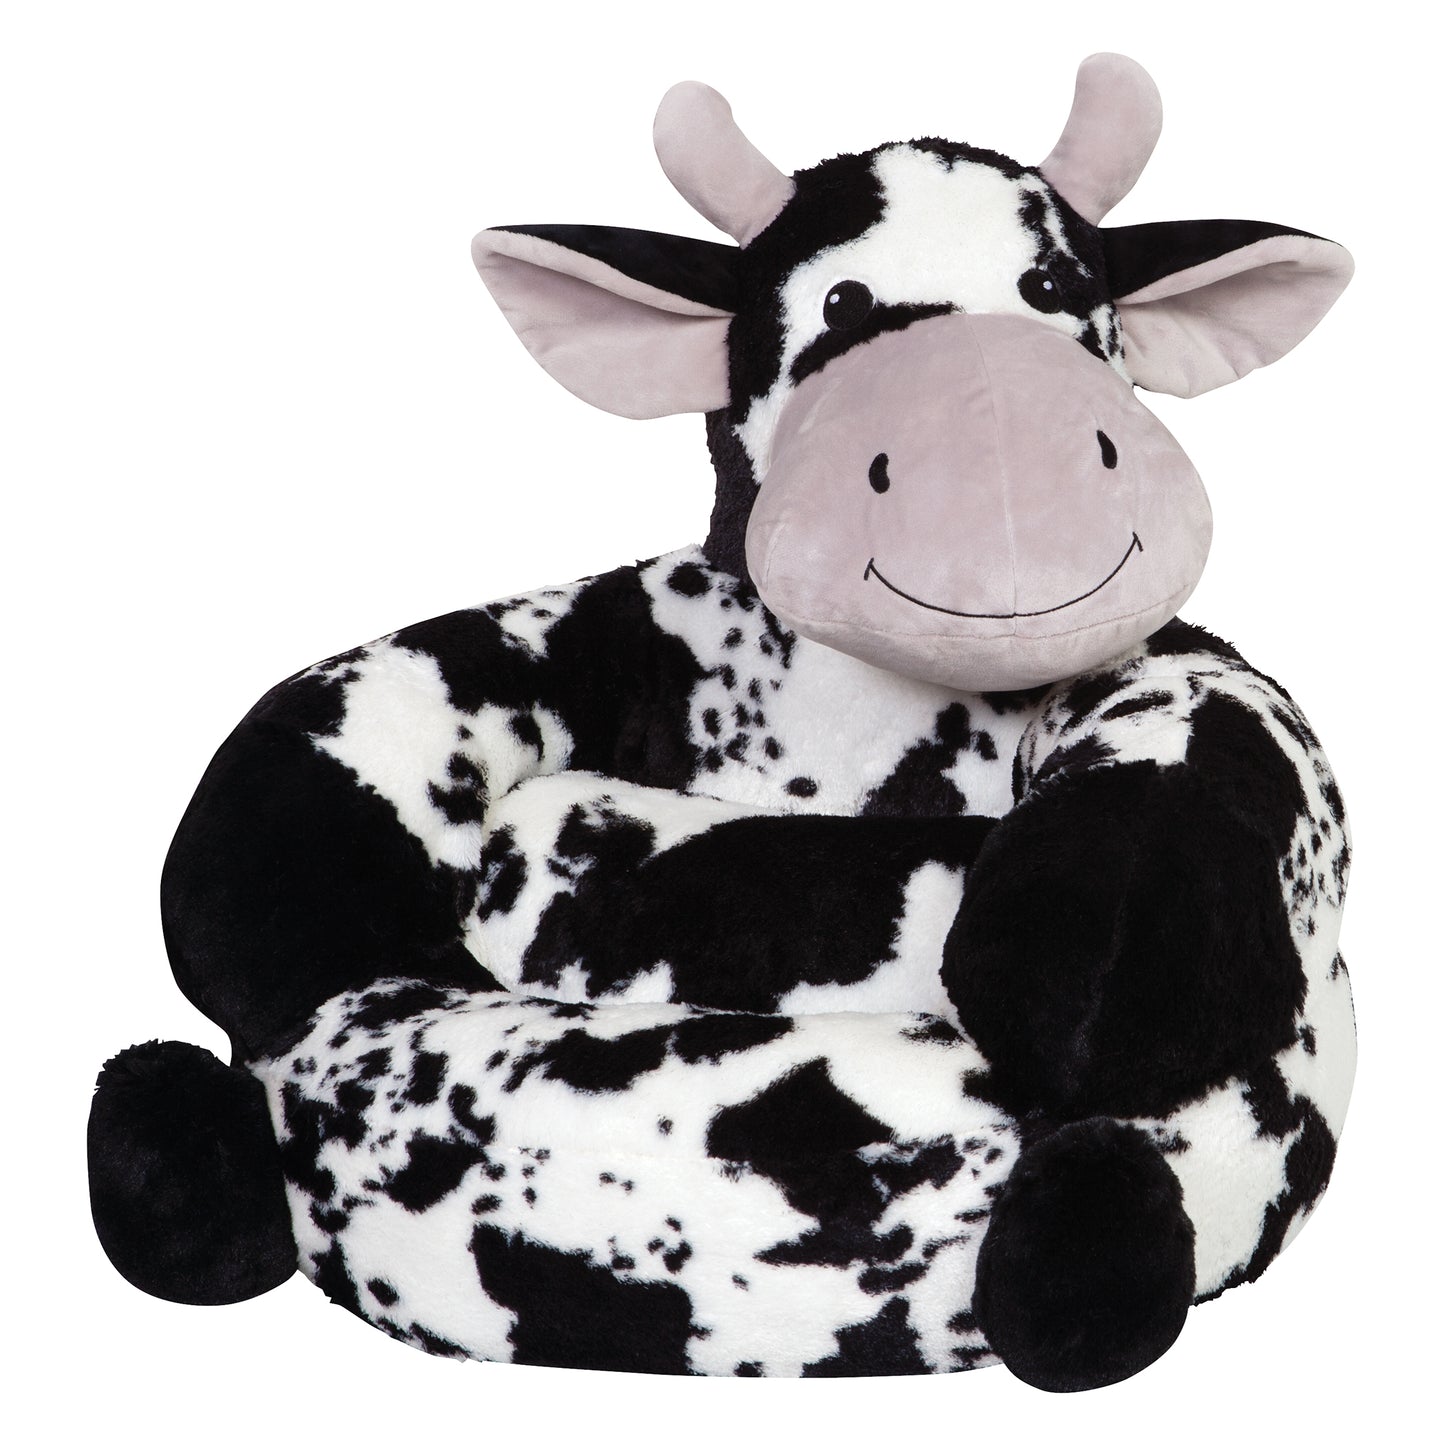 Children's Plush Cow Character Chair103401$69.99Trend Lab